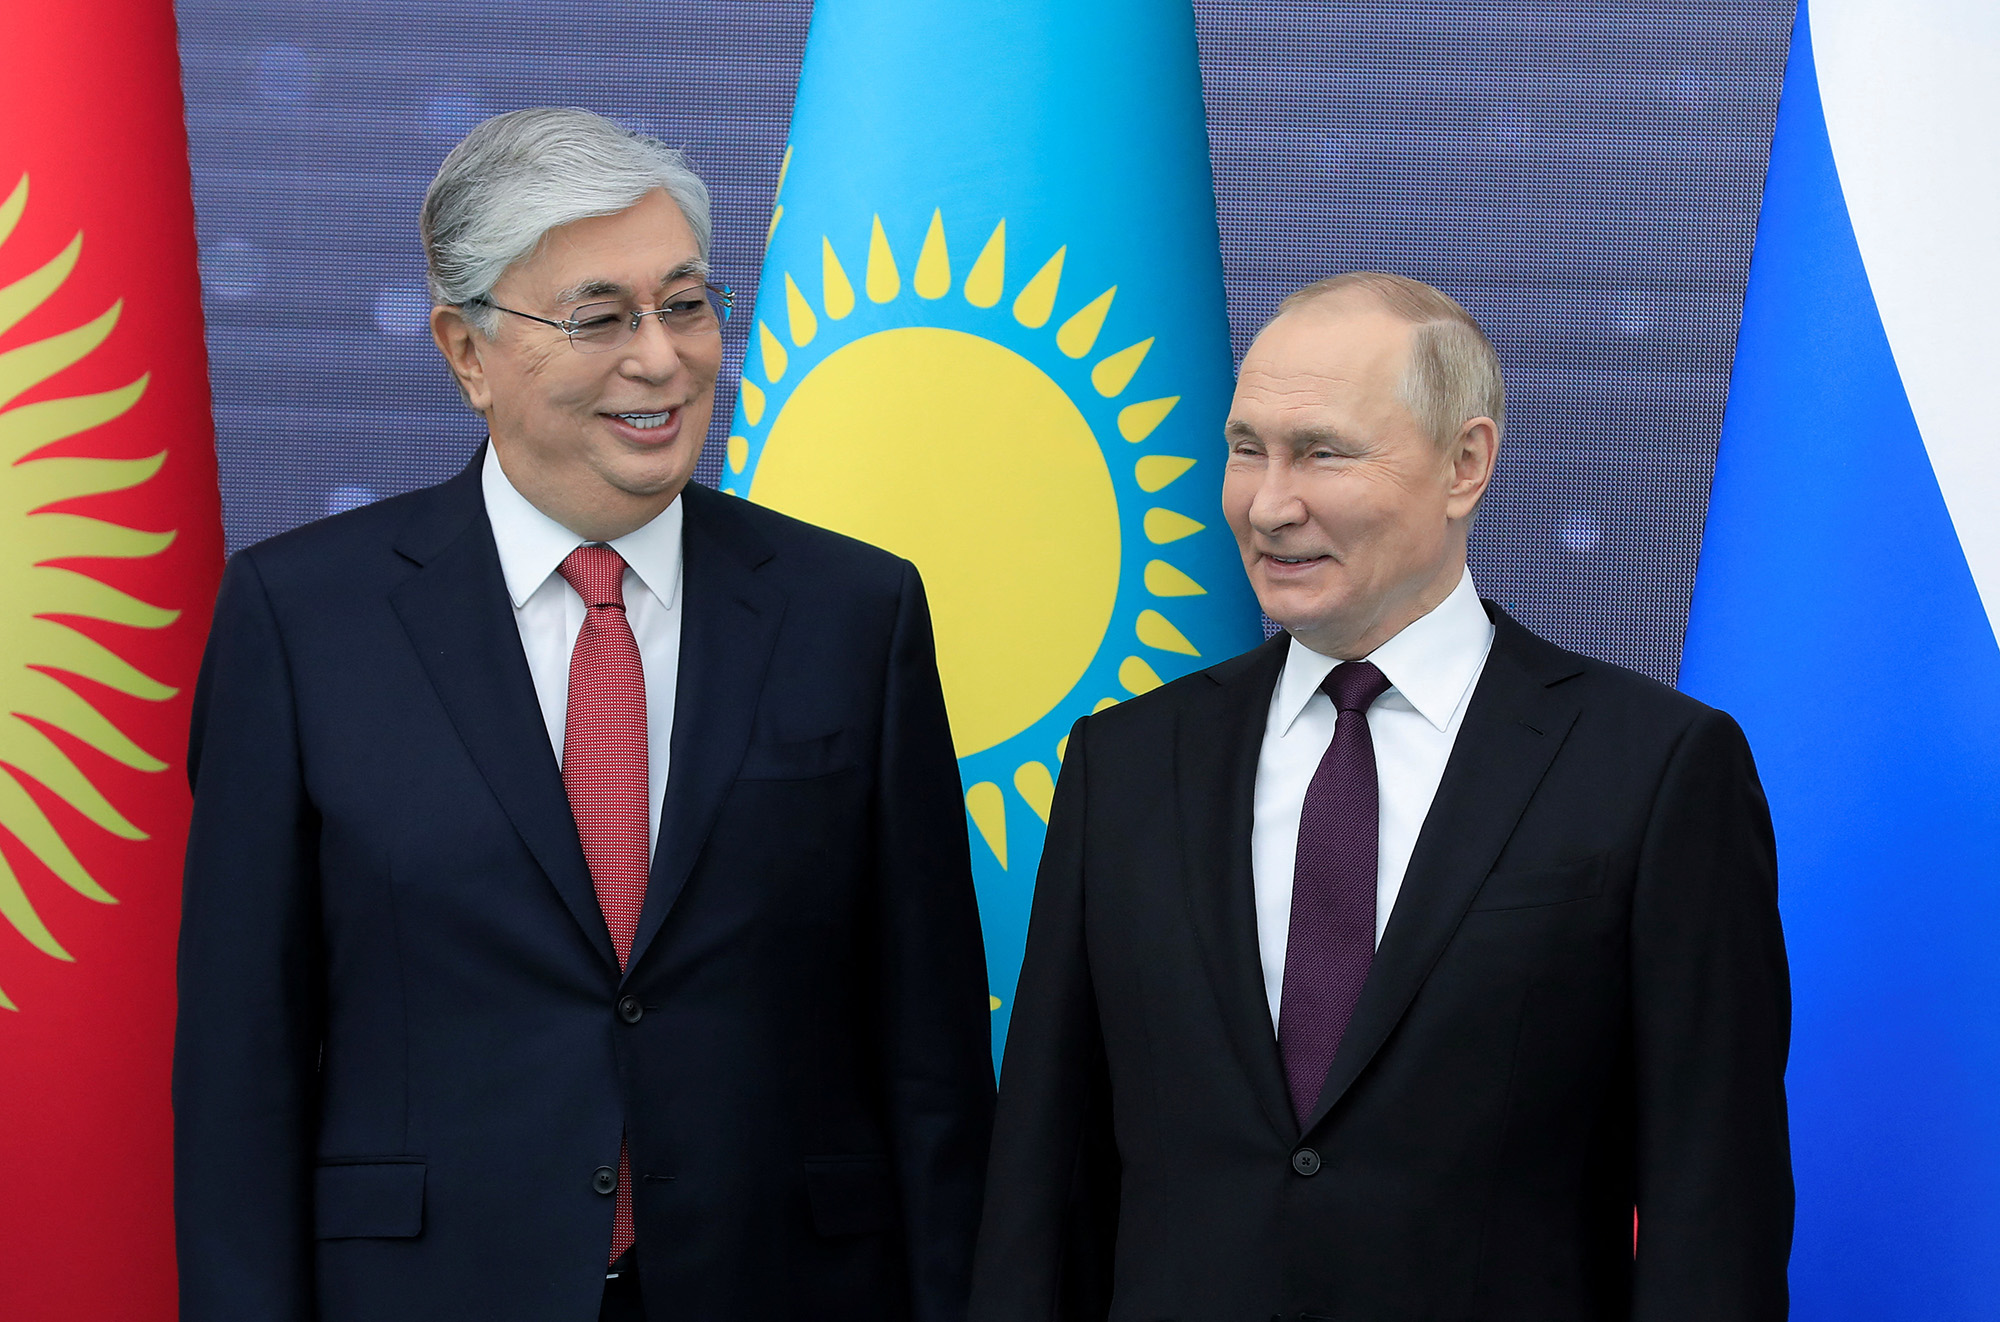 Kazakh President Kassym-Jomart Tokayev and Russian President Vladimir Putin attend the summit of leaders of the Commonwealth of Independent States (CIS) in Astana, Kazakhstan on October 14.